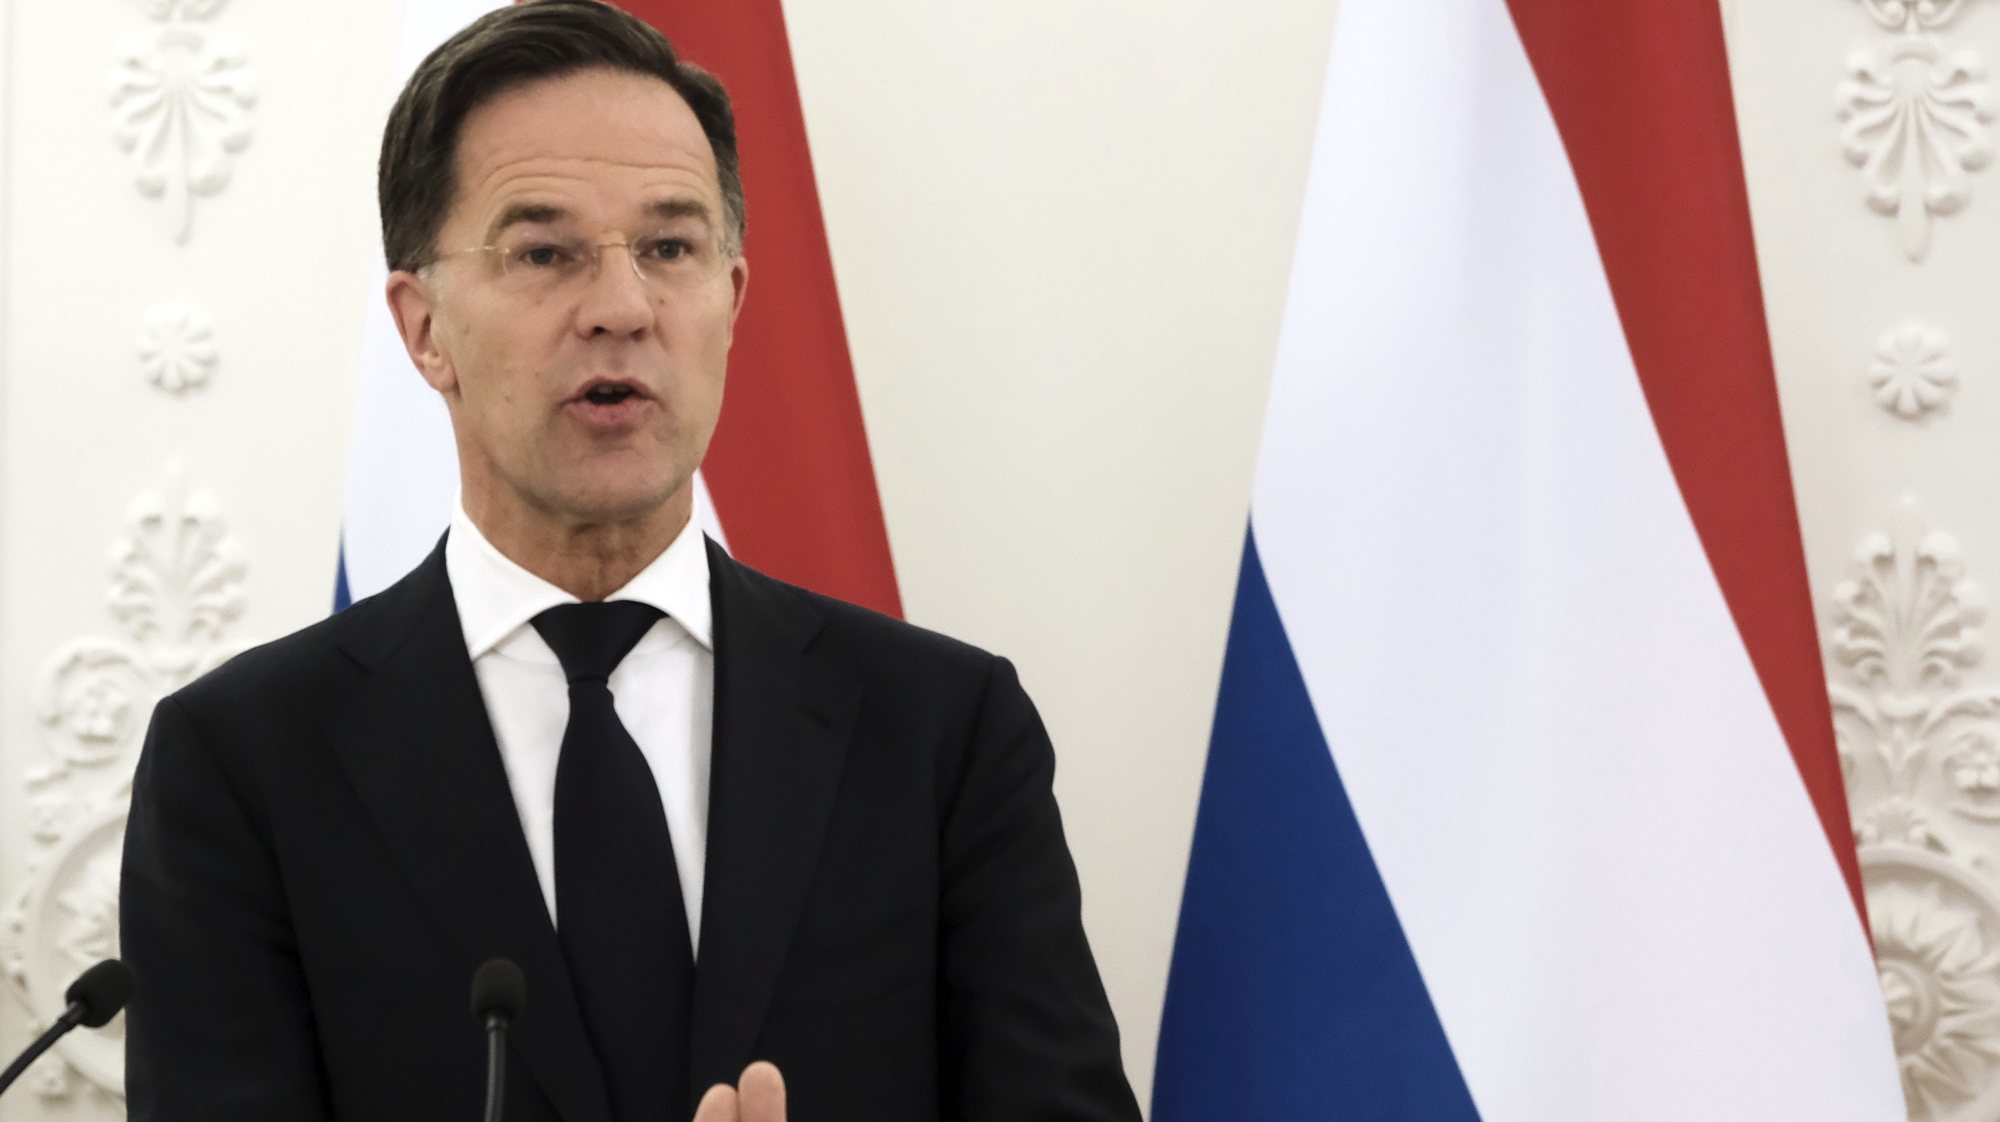 epa11255631 Dutch Prime Minister Mark Rutte attends a press conference after his meeting with the Lithuanian president in Vilnius, Lithuania, 02 April 2024. The Lithuanian president and the Dutch prime minister during the meeting discussed defense and security, the strengthening of NATOÃ•s eastern flank, support for Ukraine, and current EU issues.  EPA/VALDA KALNINA